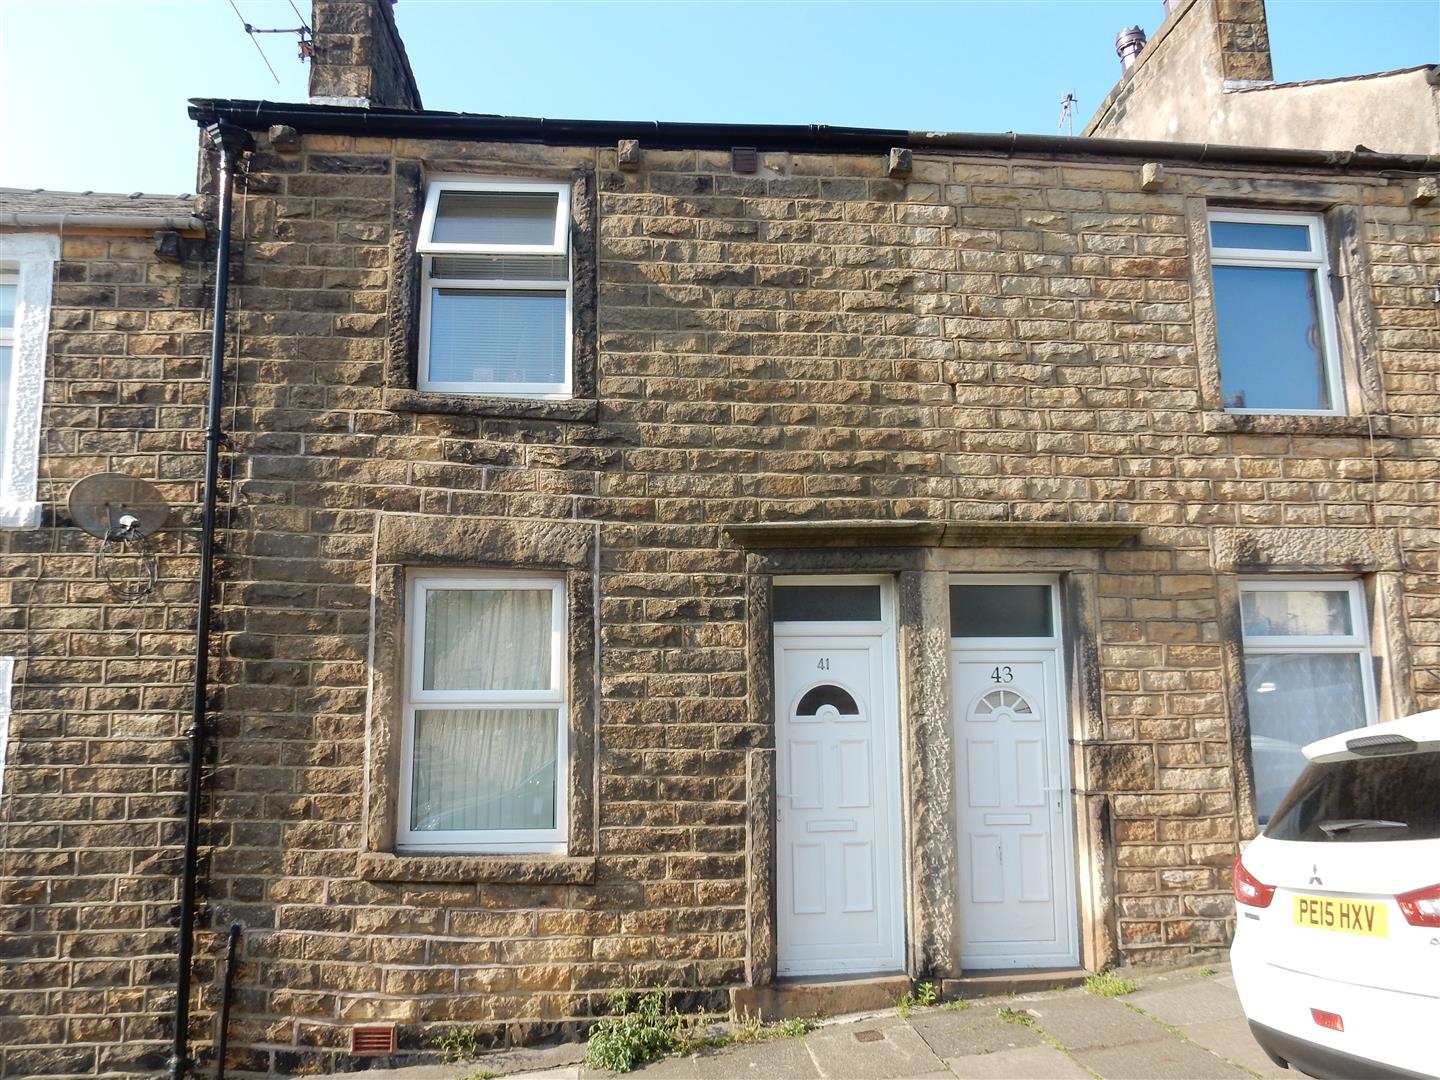 Does a gross yield of 13% sound appealing to you? Check out this Lancaster property